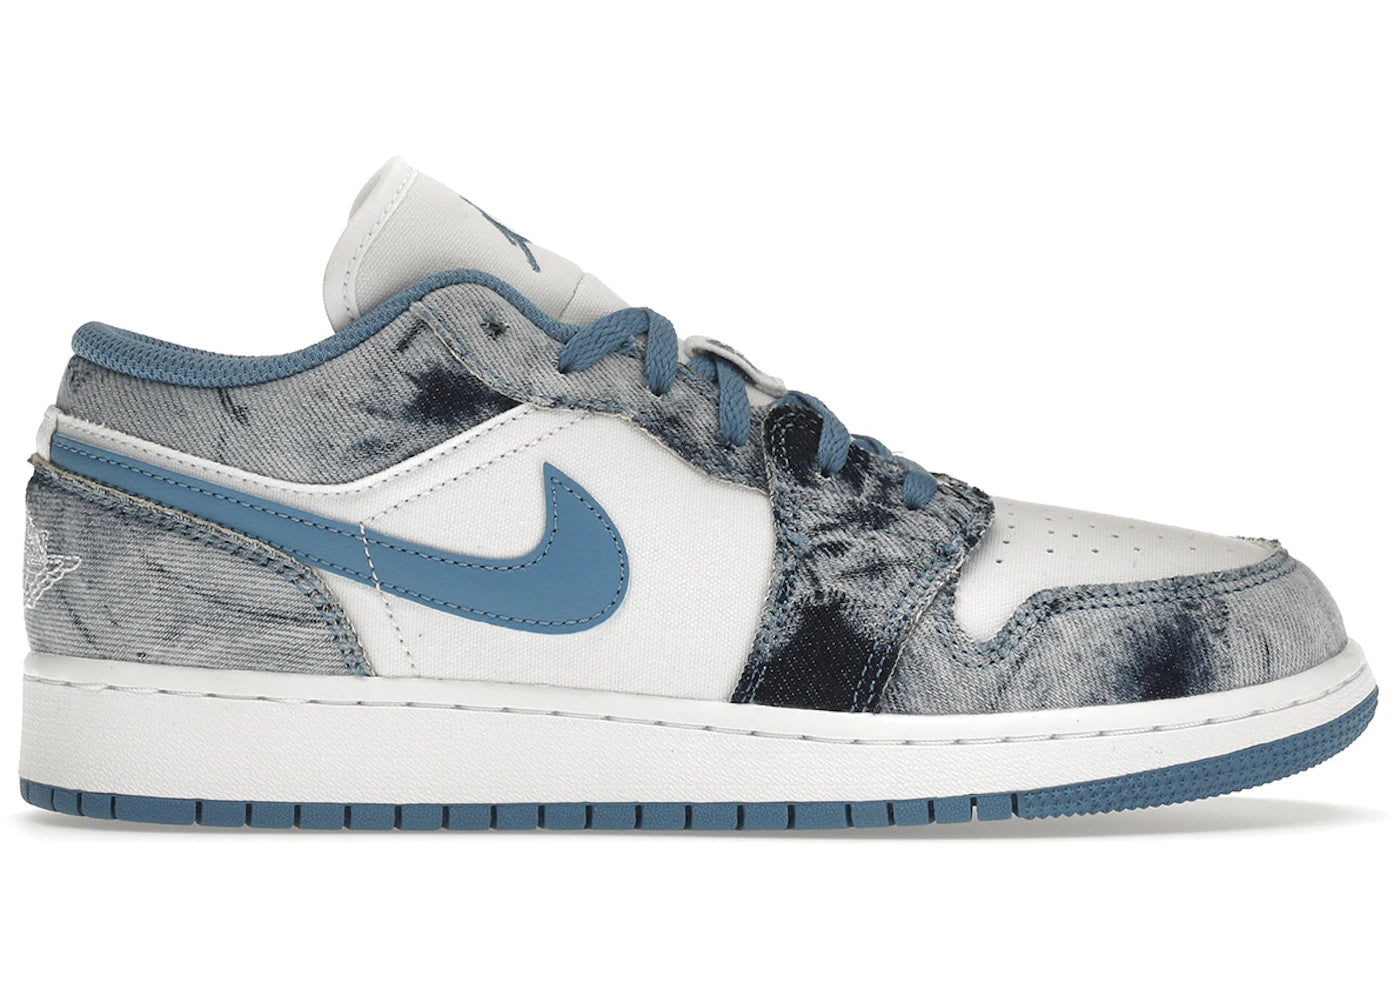 Jordan 1 Low Washed Denim (GS) – Hypepoint.ca